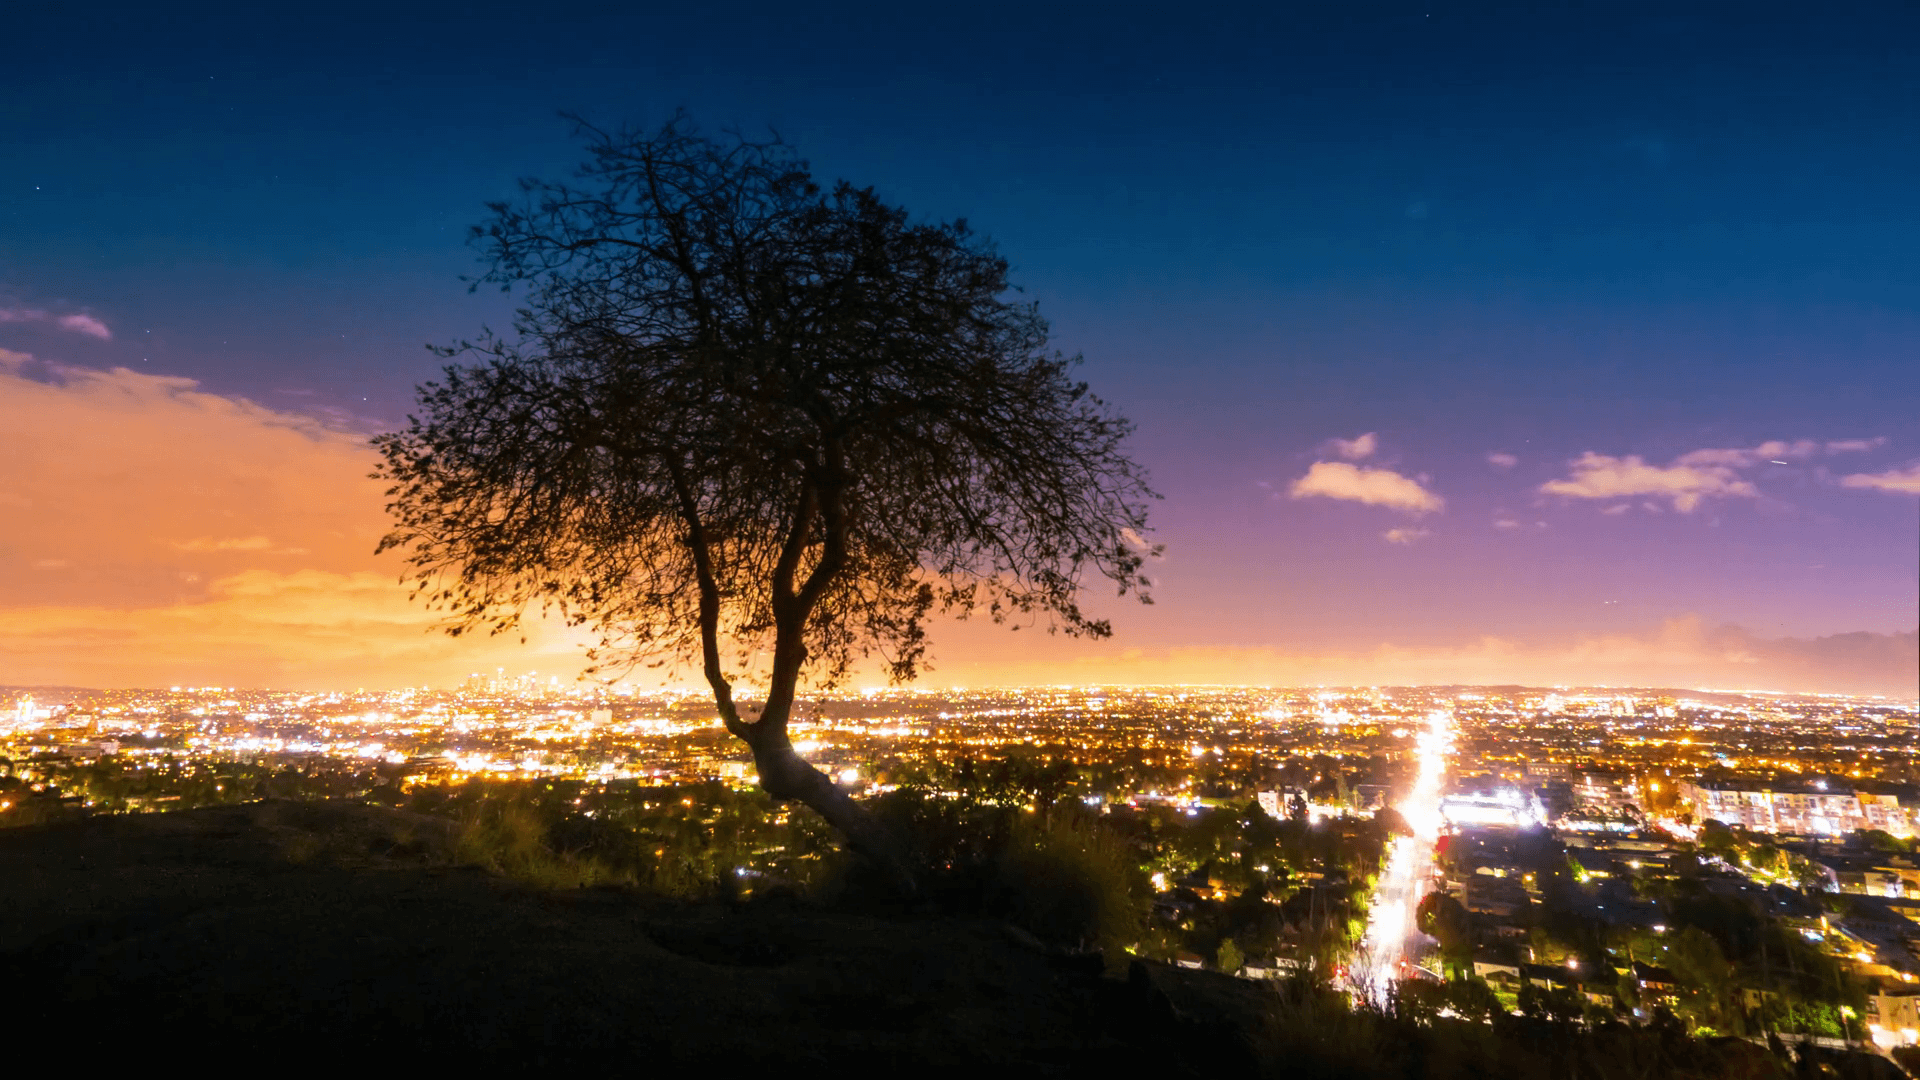 Lone tree silhouette with Los Angeles cityscape in background at night, view from Hollywood Hills. 4K UHD Timelapse. Stock Video Footage